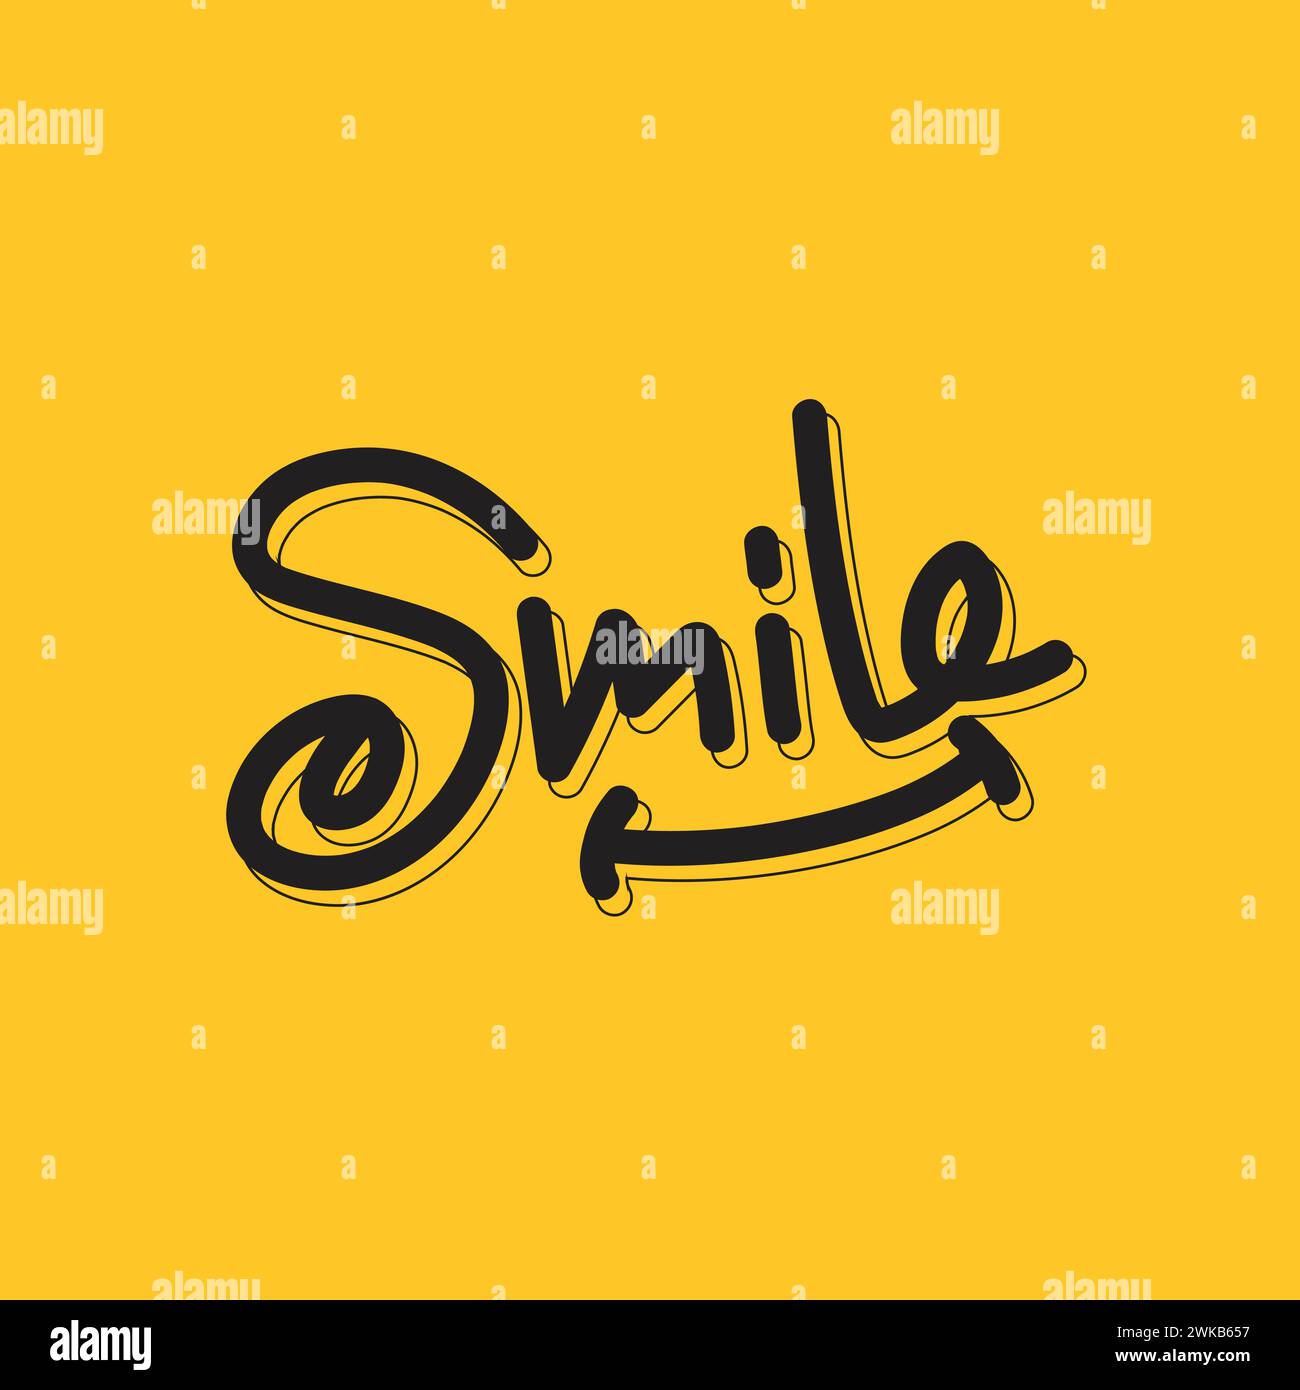 Smile lettering logo vector illustration with joy, laughter, fun, smile sign. Stock Vector